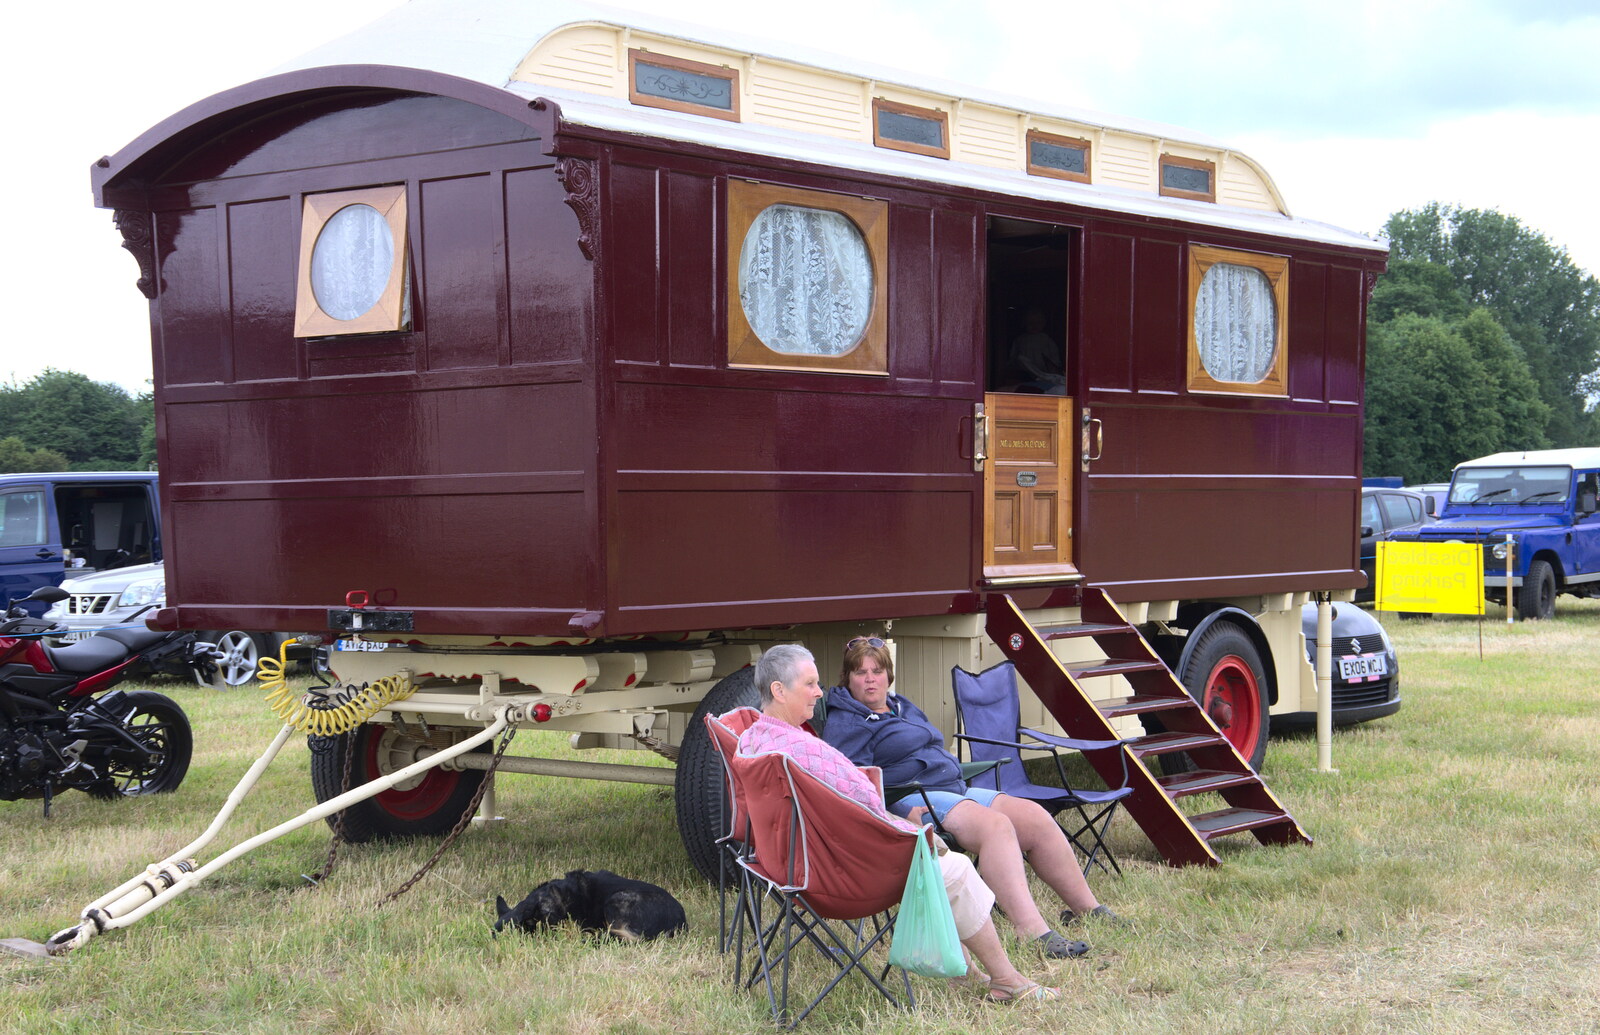 A massive caravan from The Formerly-Known-As-The-Eye-Show, Palgrave, Suffolk - 17th June 2018